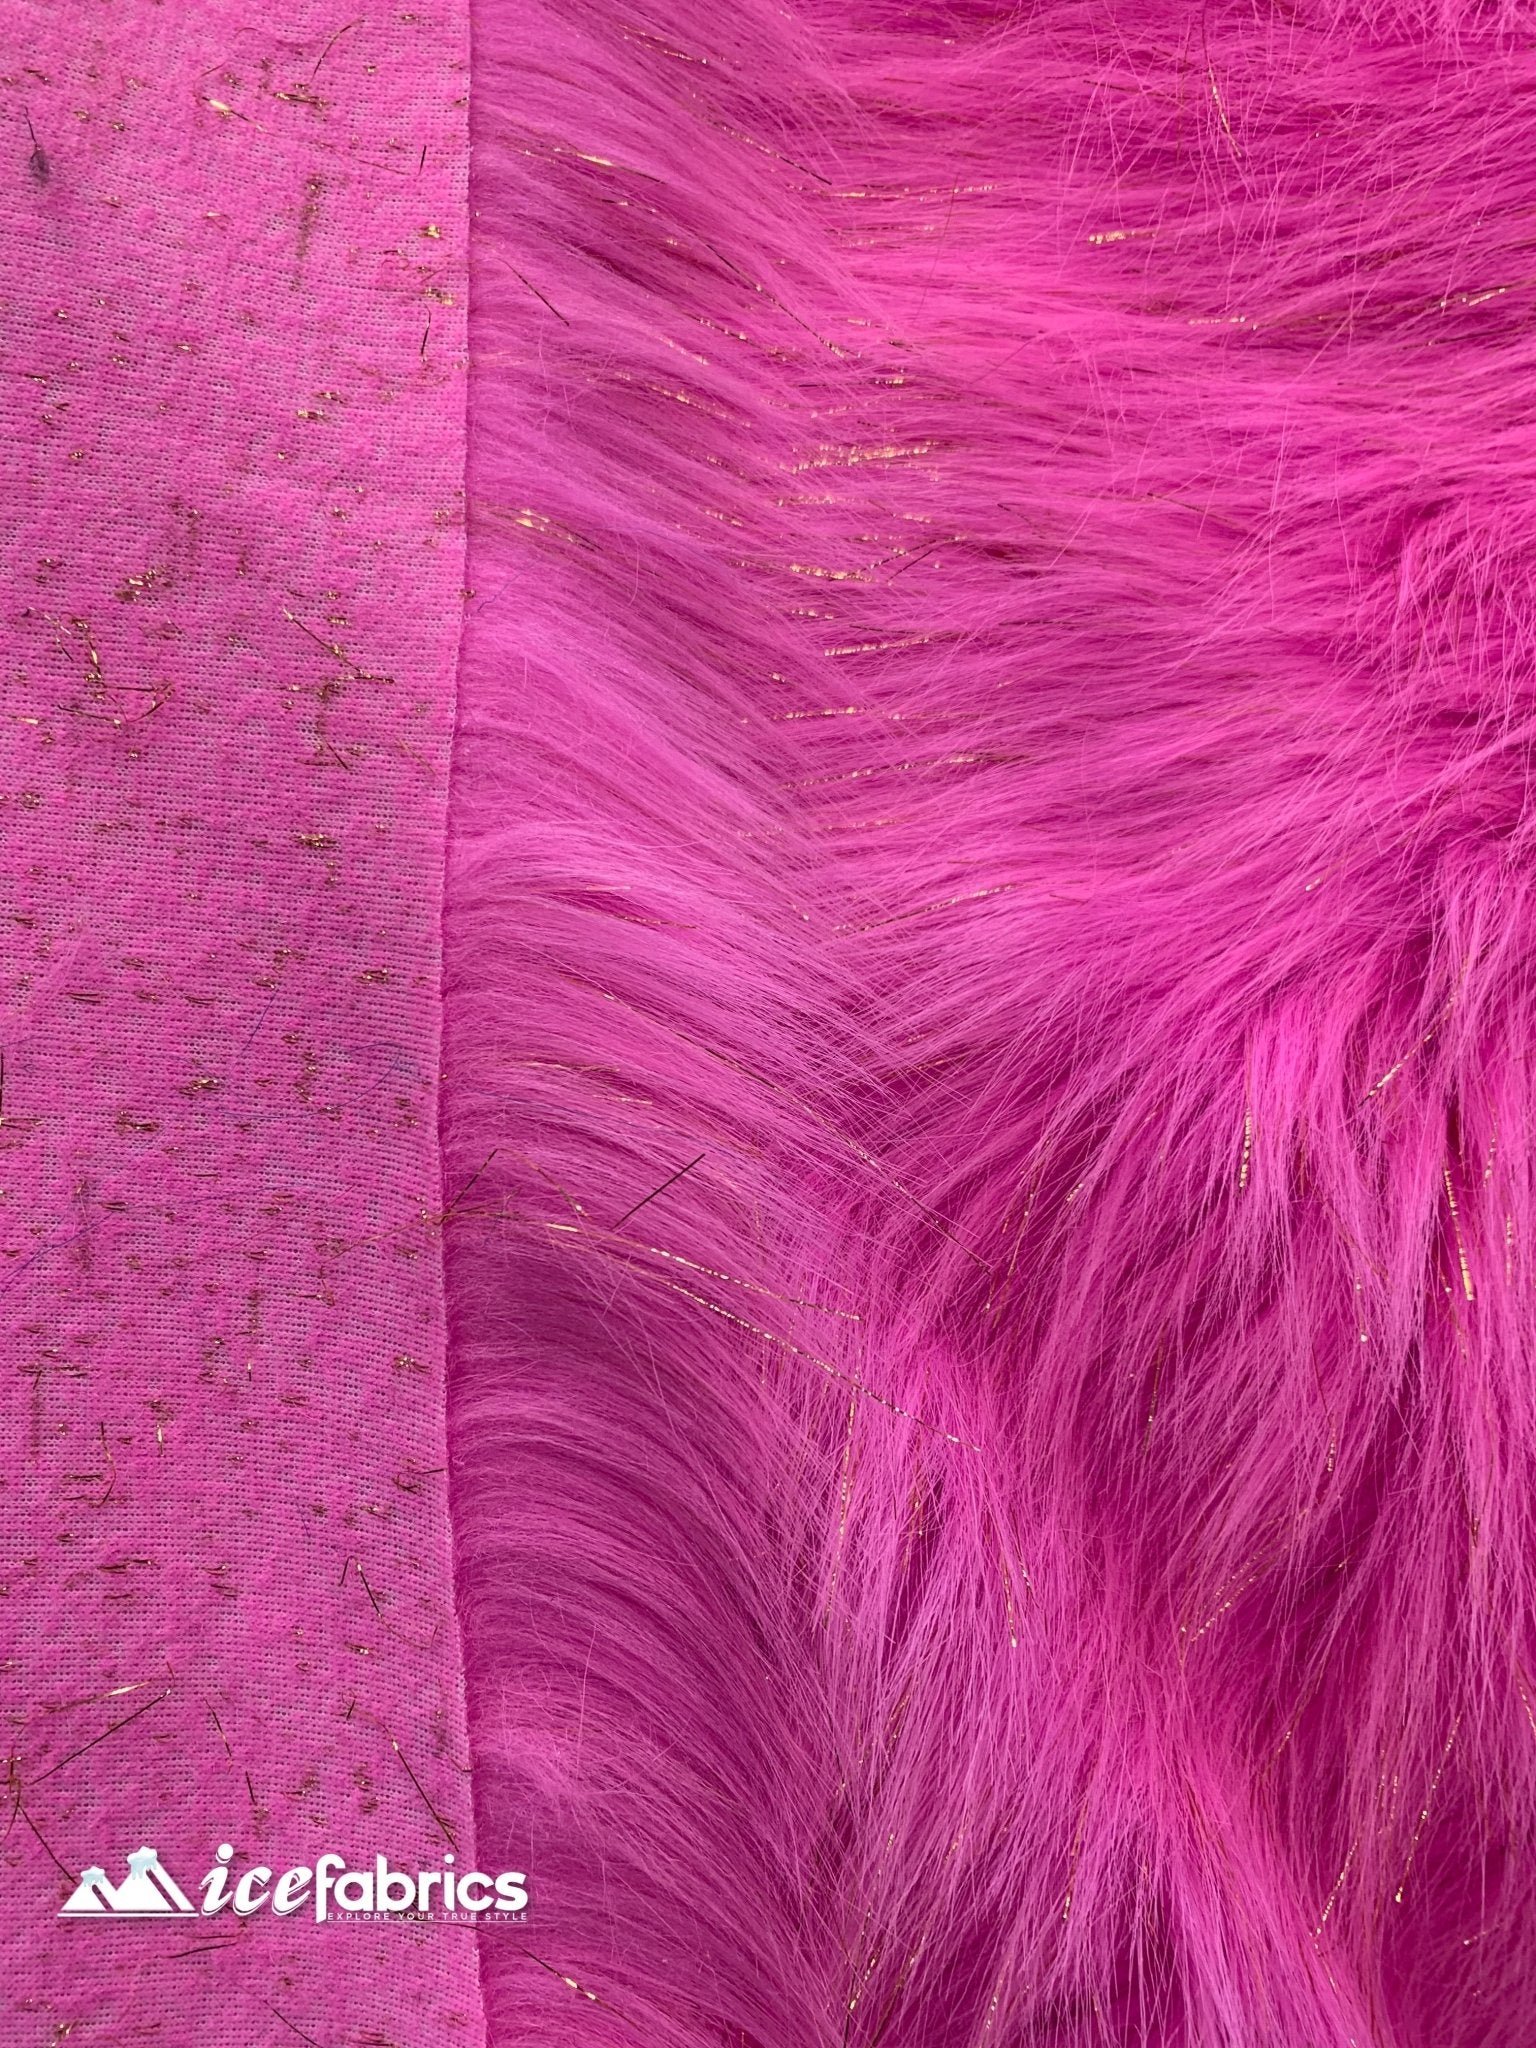 Tinsel Long Pile Mongolian Faux Fur Fabric By The Yard Fashion FabricICEFABRICICE FABRICSYellowBy The Yard (60 inches Wide)Tinsel Long Pile Mongolian Faux Fur Fabric By The Yard Fashion Fabric ICEFABRIC